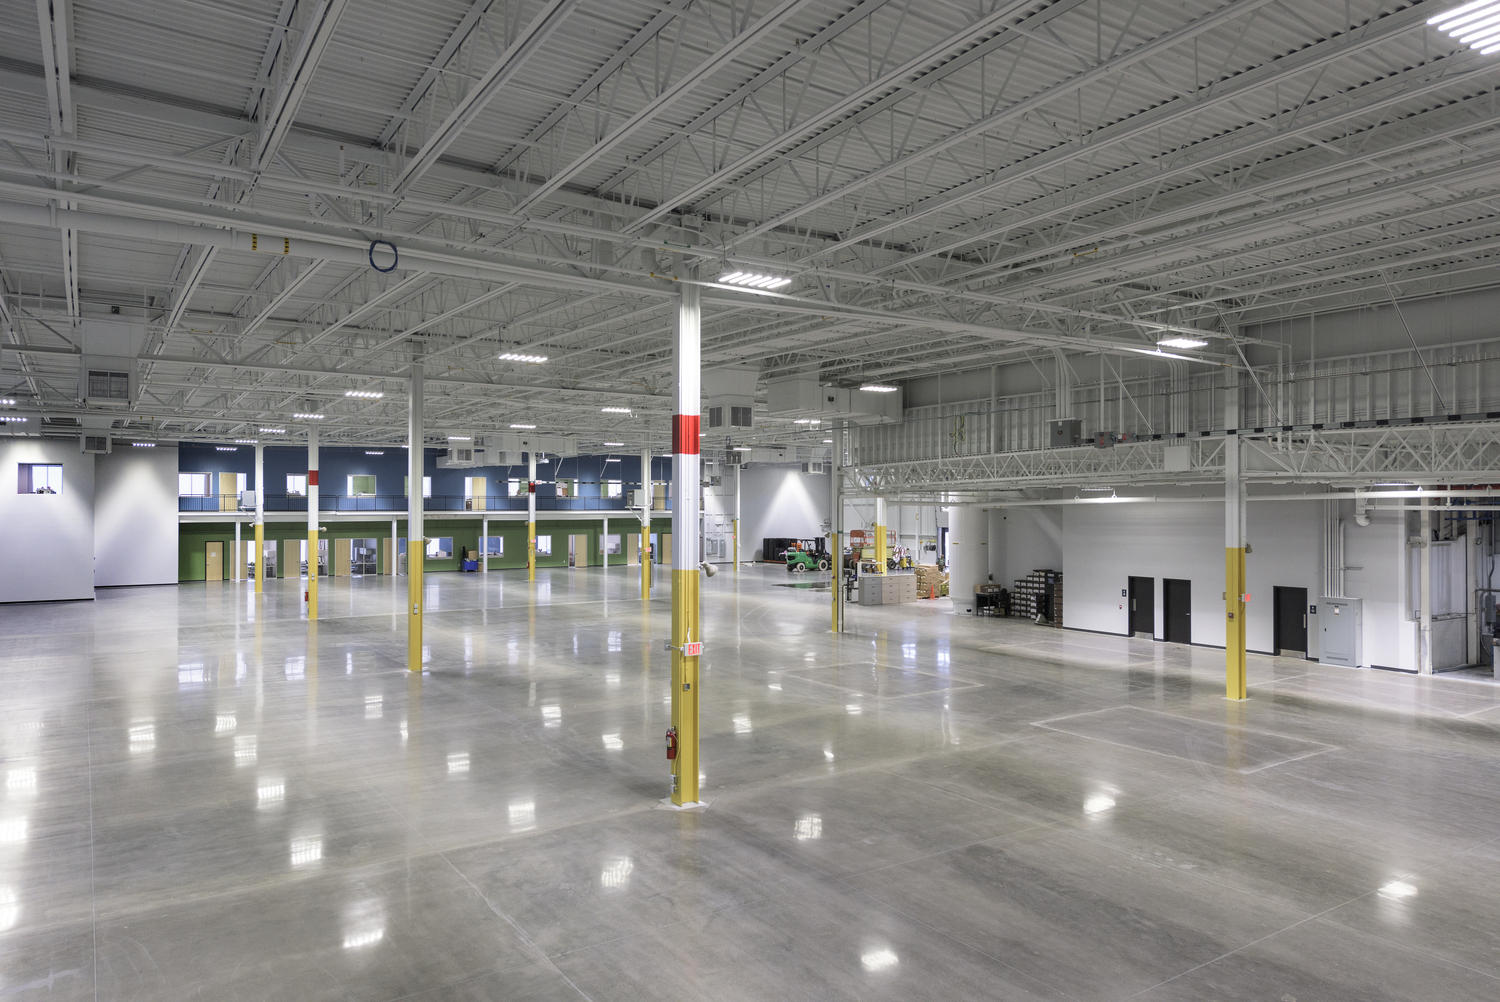 Interior and exterior photos of facility

GE Plaant Hooksett NH